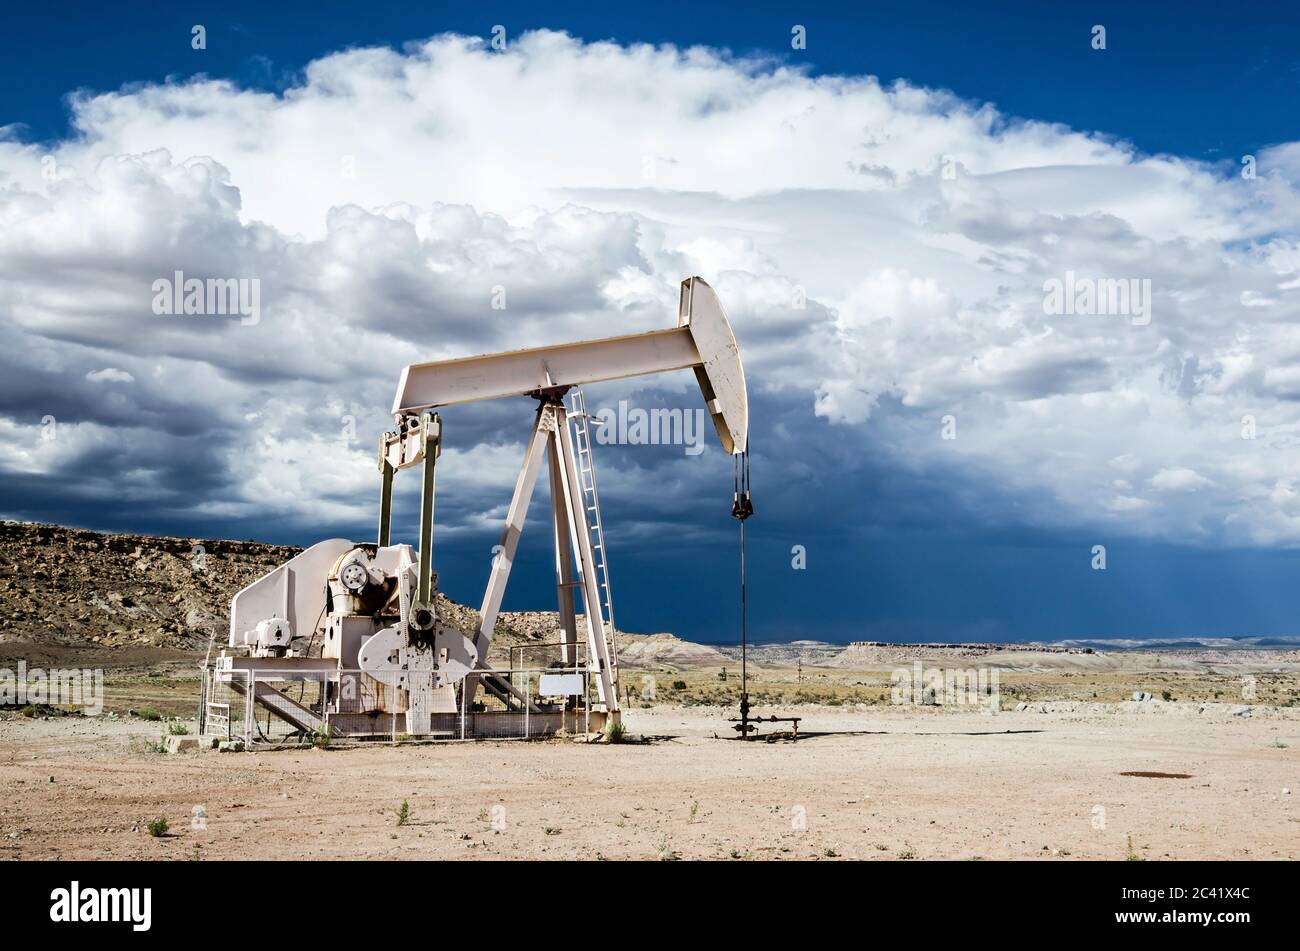 Oil pump in the desert with dark clouds of a thunderstorm looming in the background Stock Photo